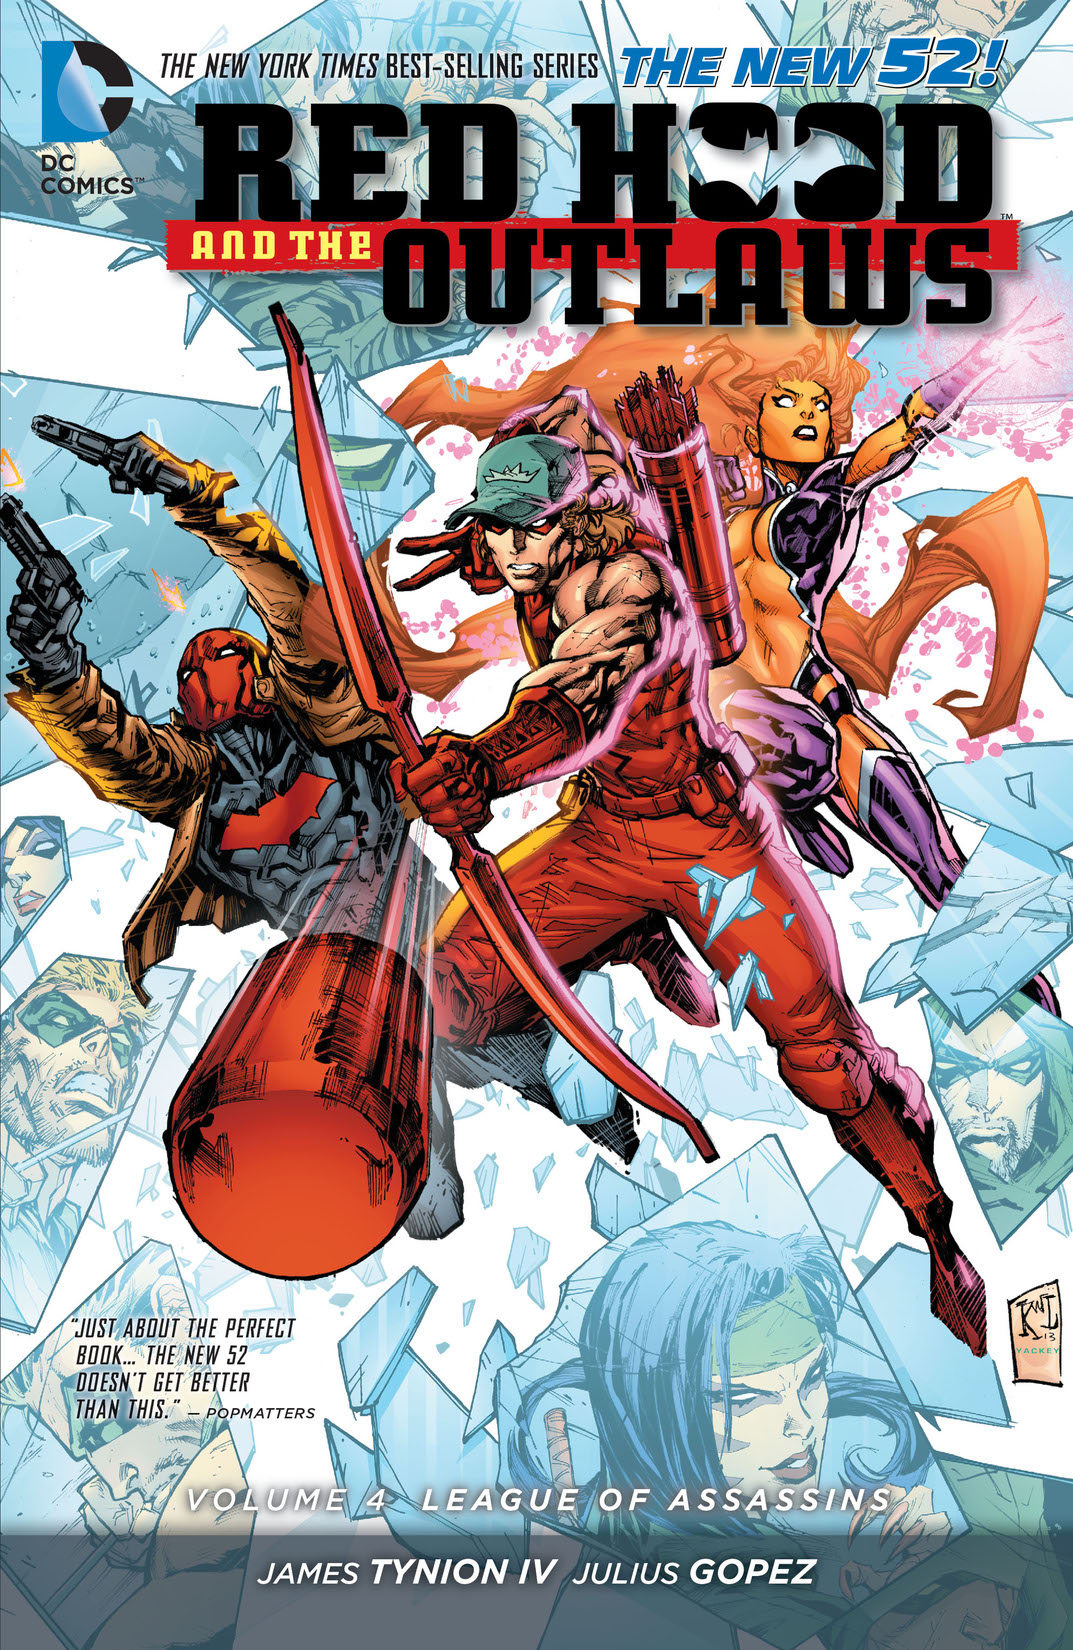 Red Hood and the Outlaws Vol. 4: League of Assassins preview images